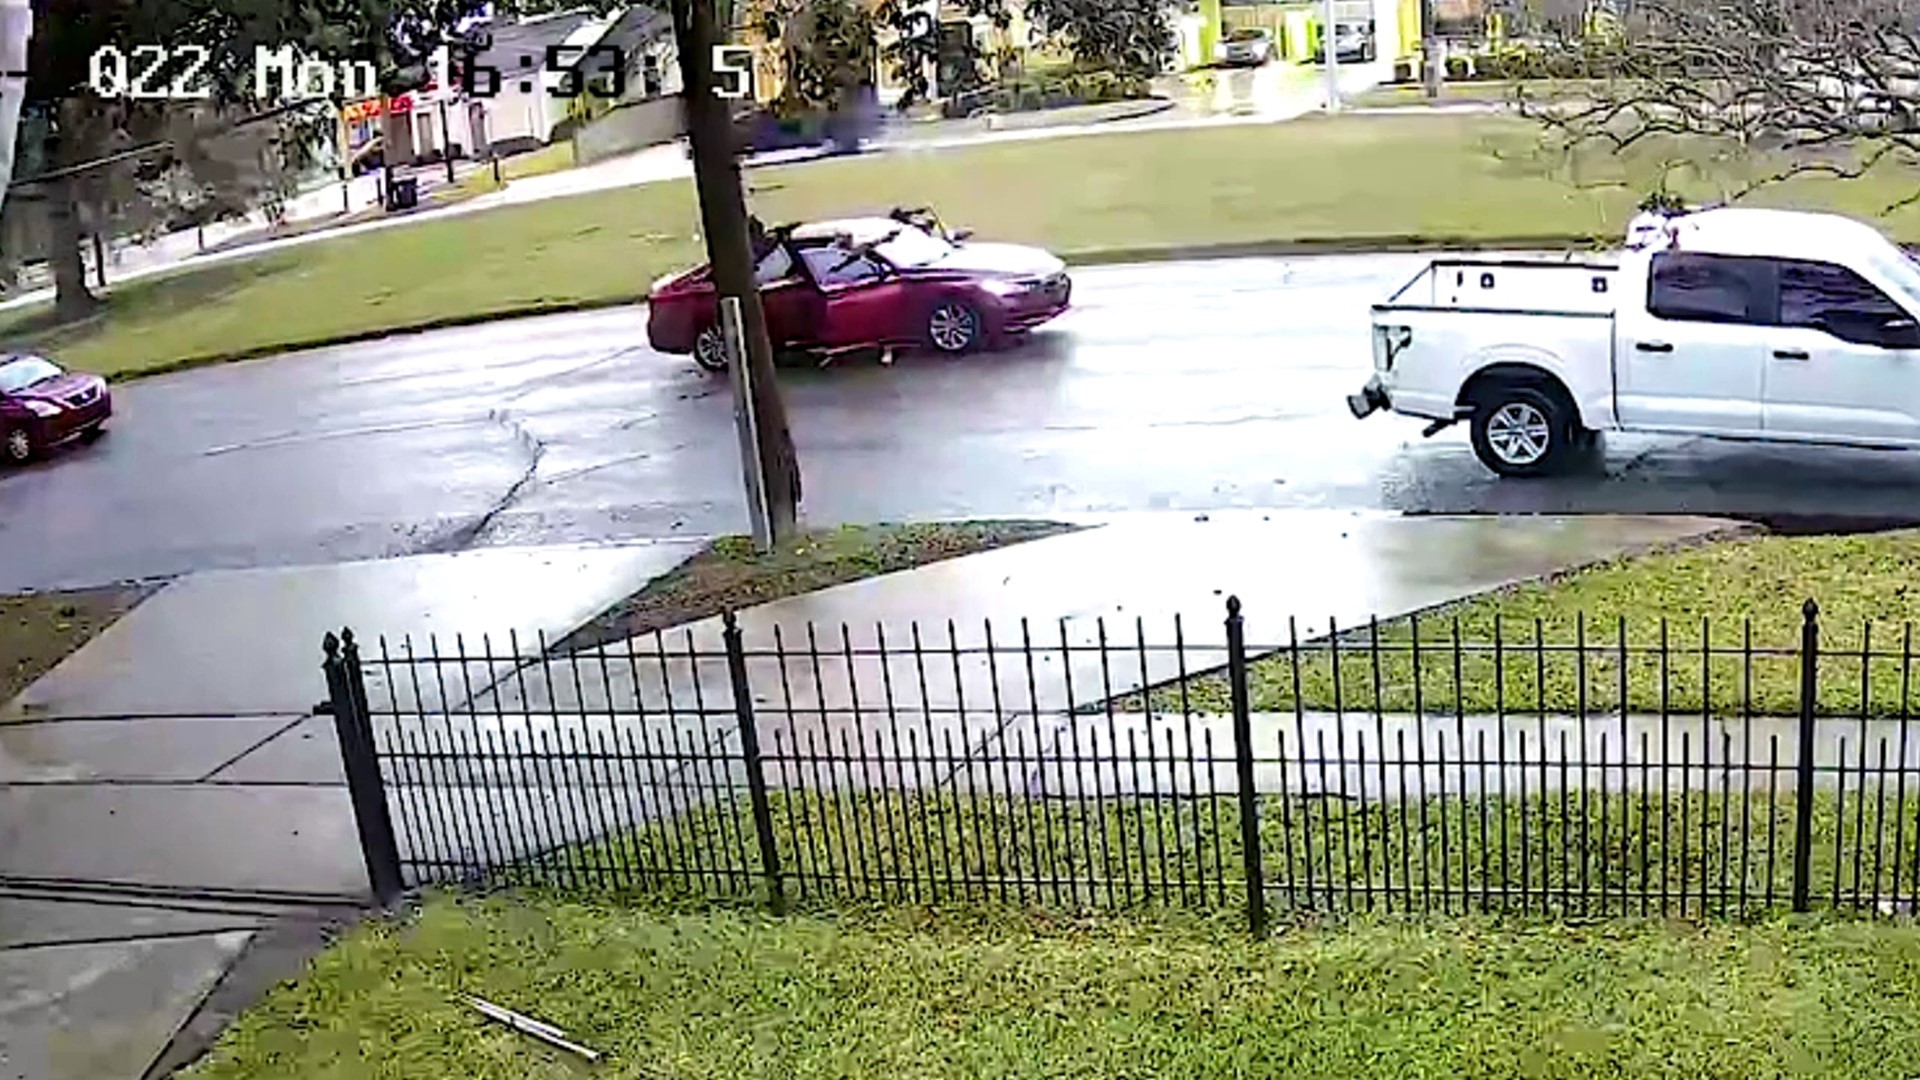 Raw video footage of a shooting in the 3800 block of Elysian Fields on Jan. 24, 2022.